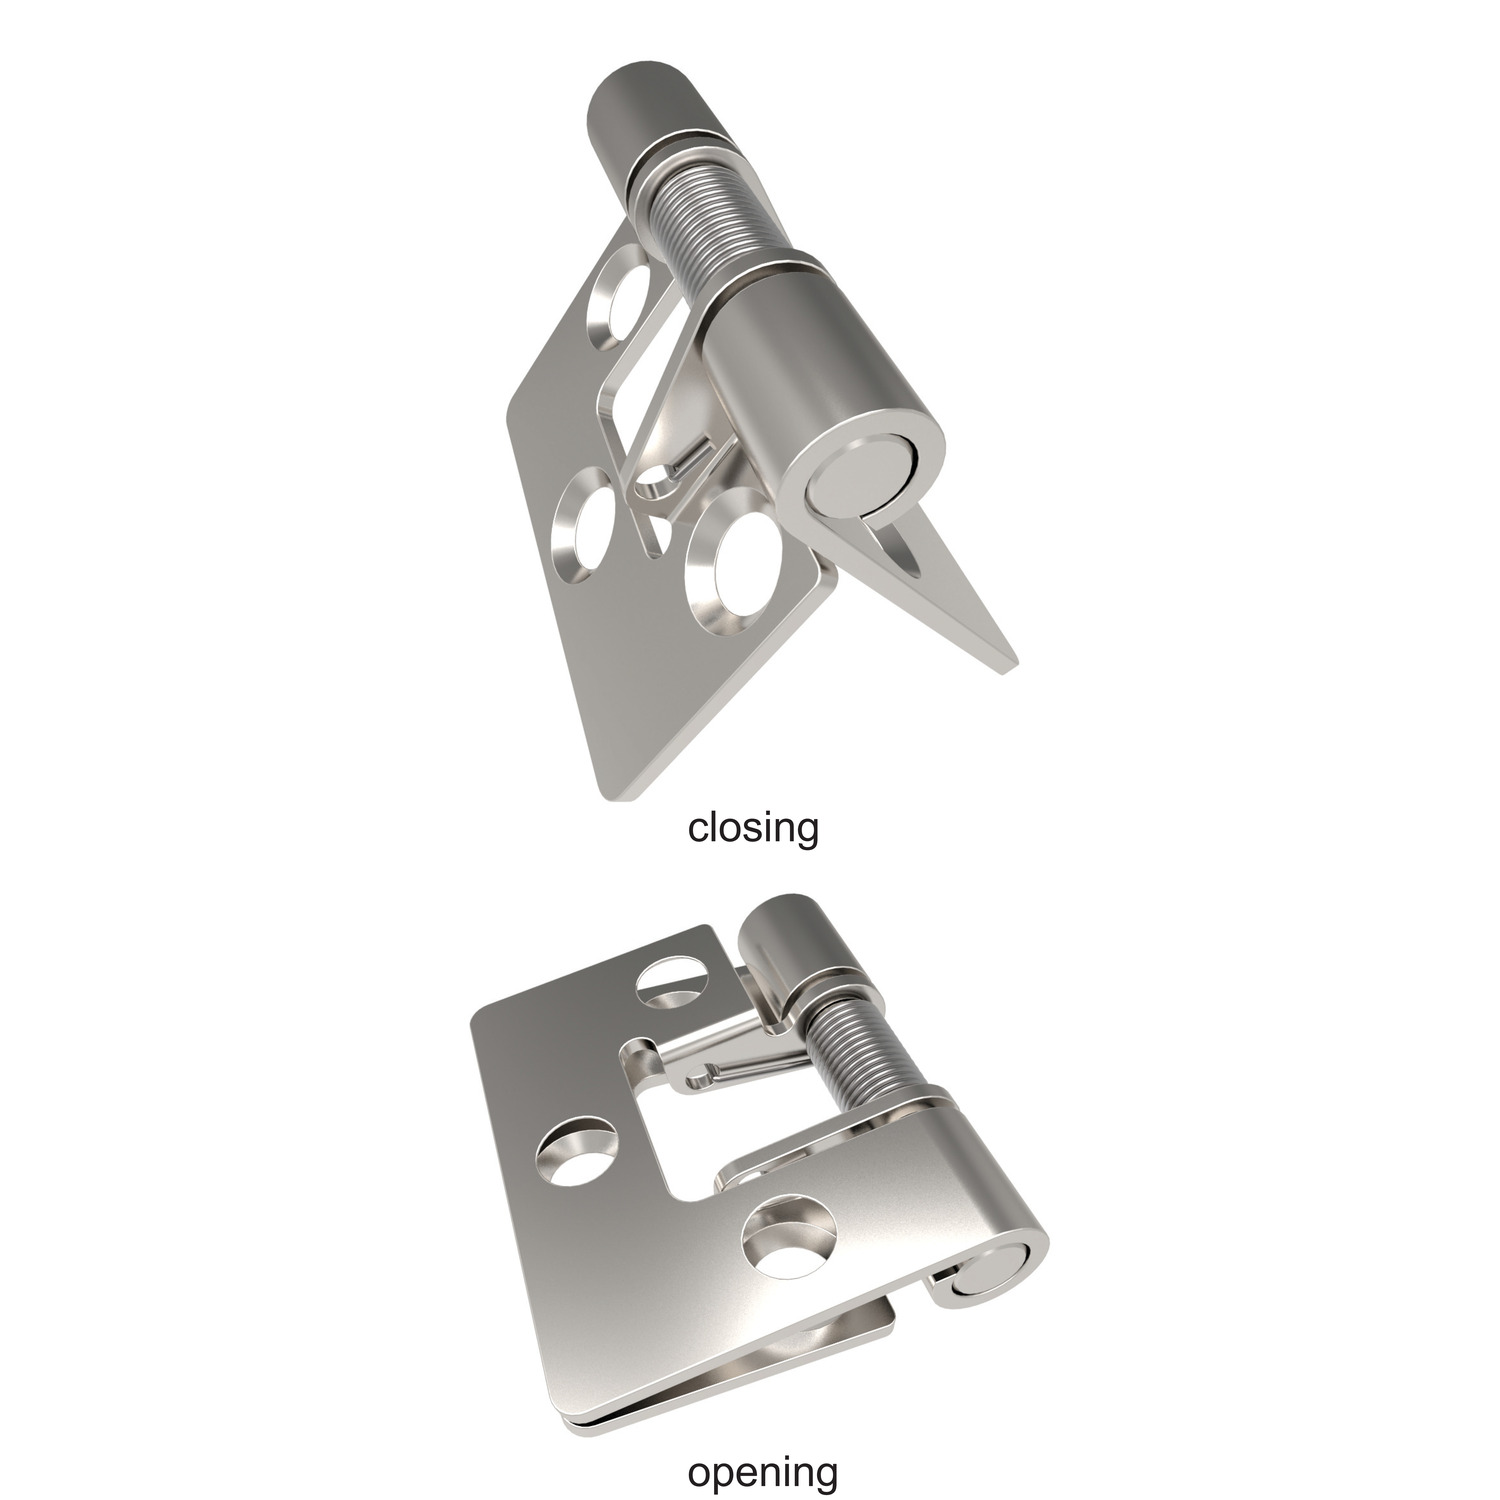 S4200.AC0010 Spring Hinges - High Tension - SS. Left - Closing - 41